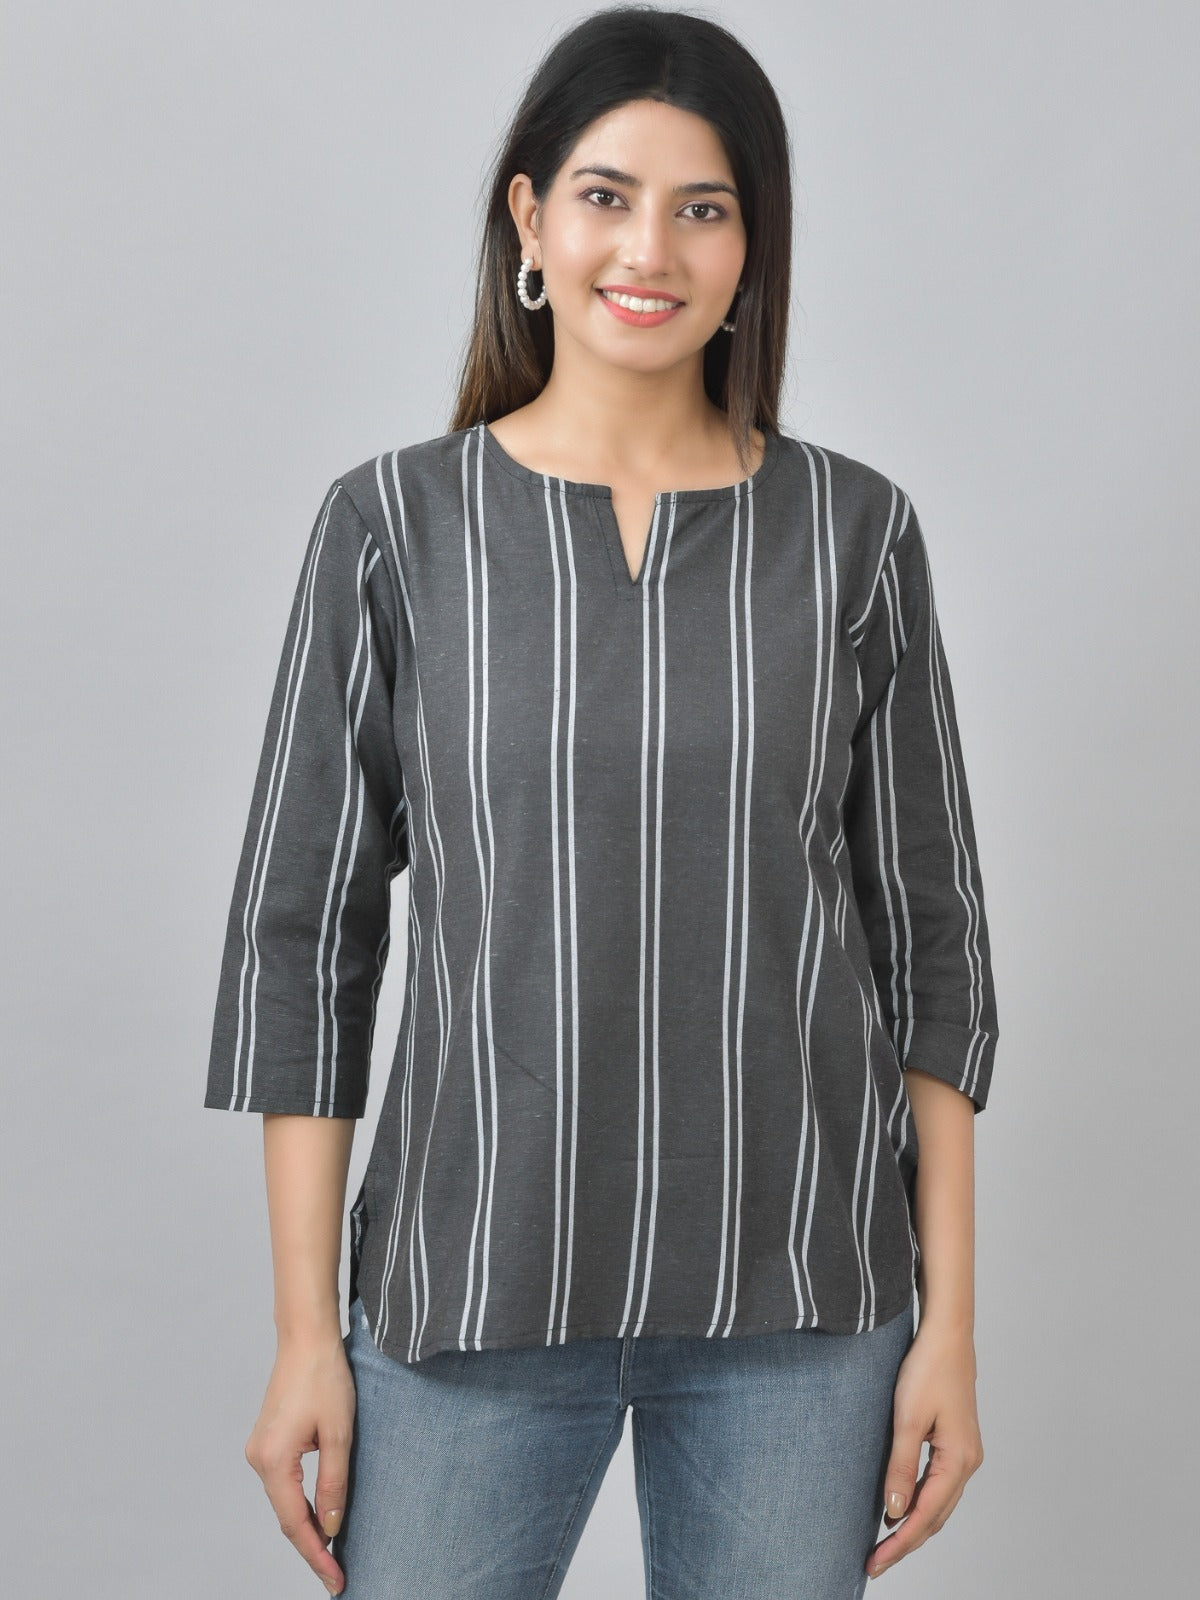 Pack Of 2 Black And Brown Dark Striped Cotton Womens Top Combo